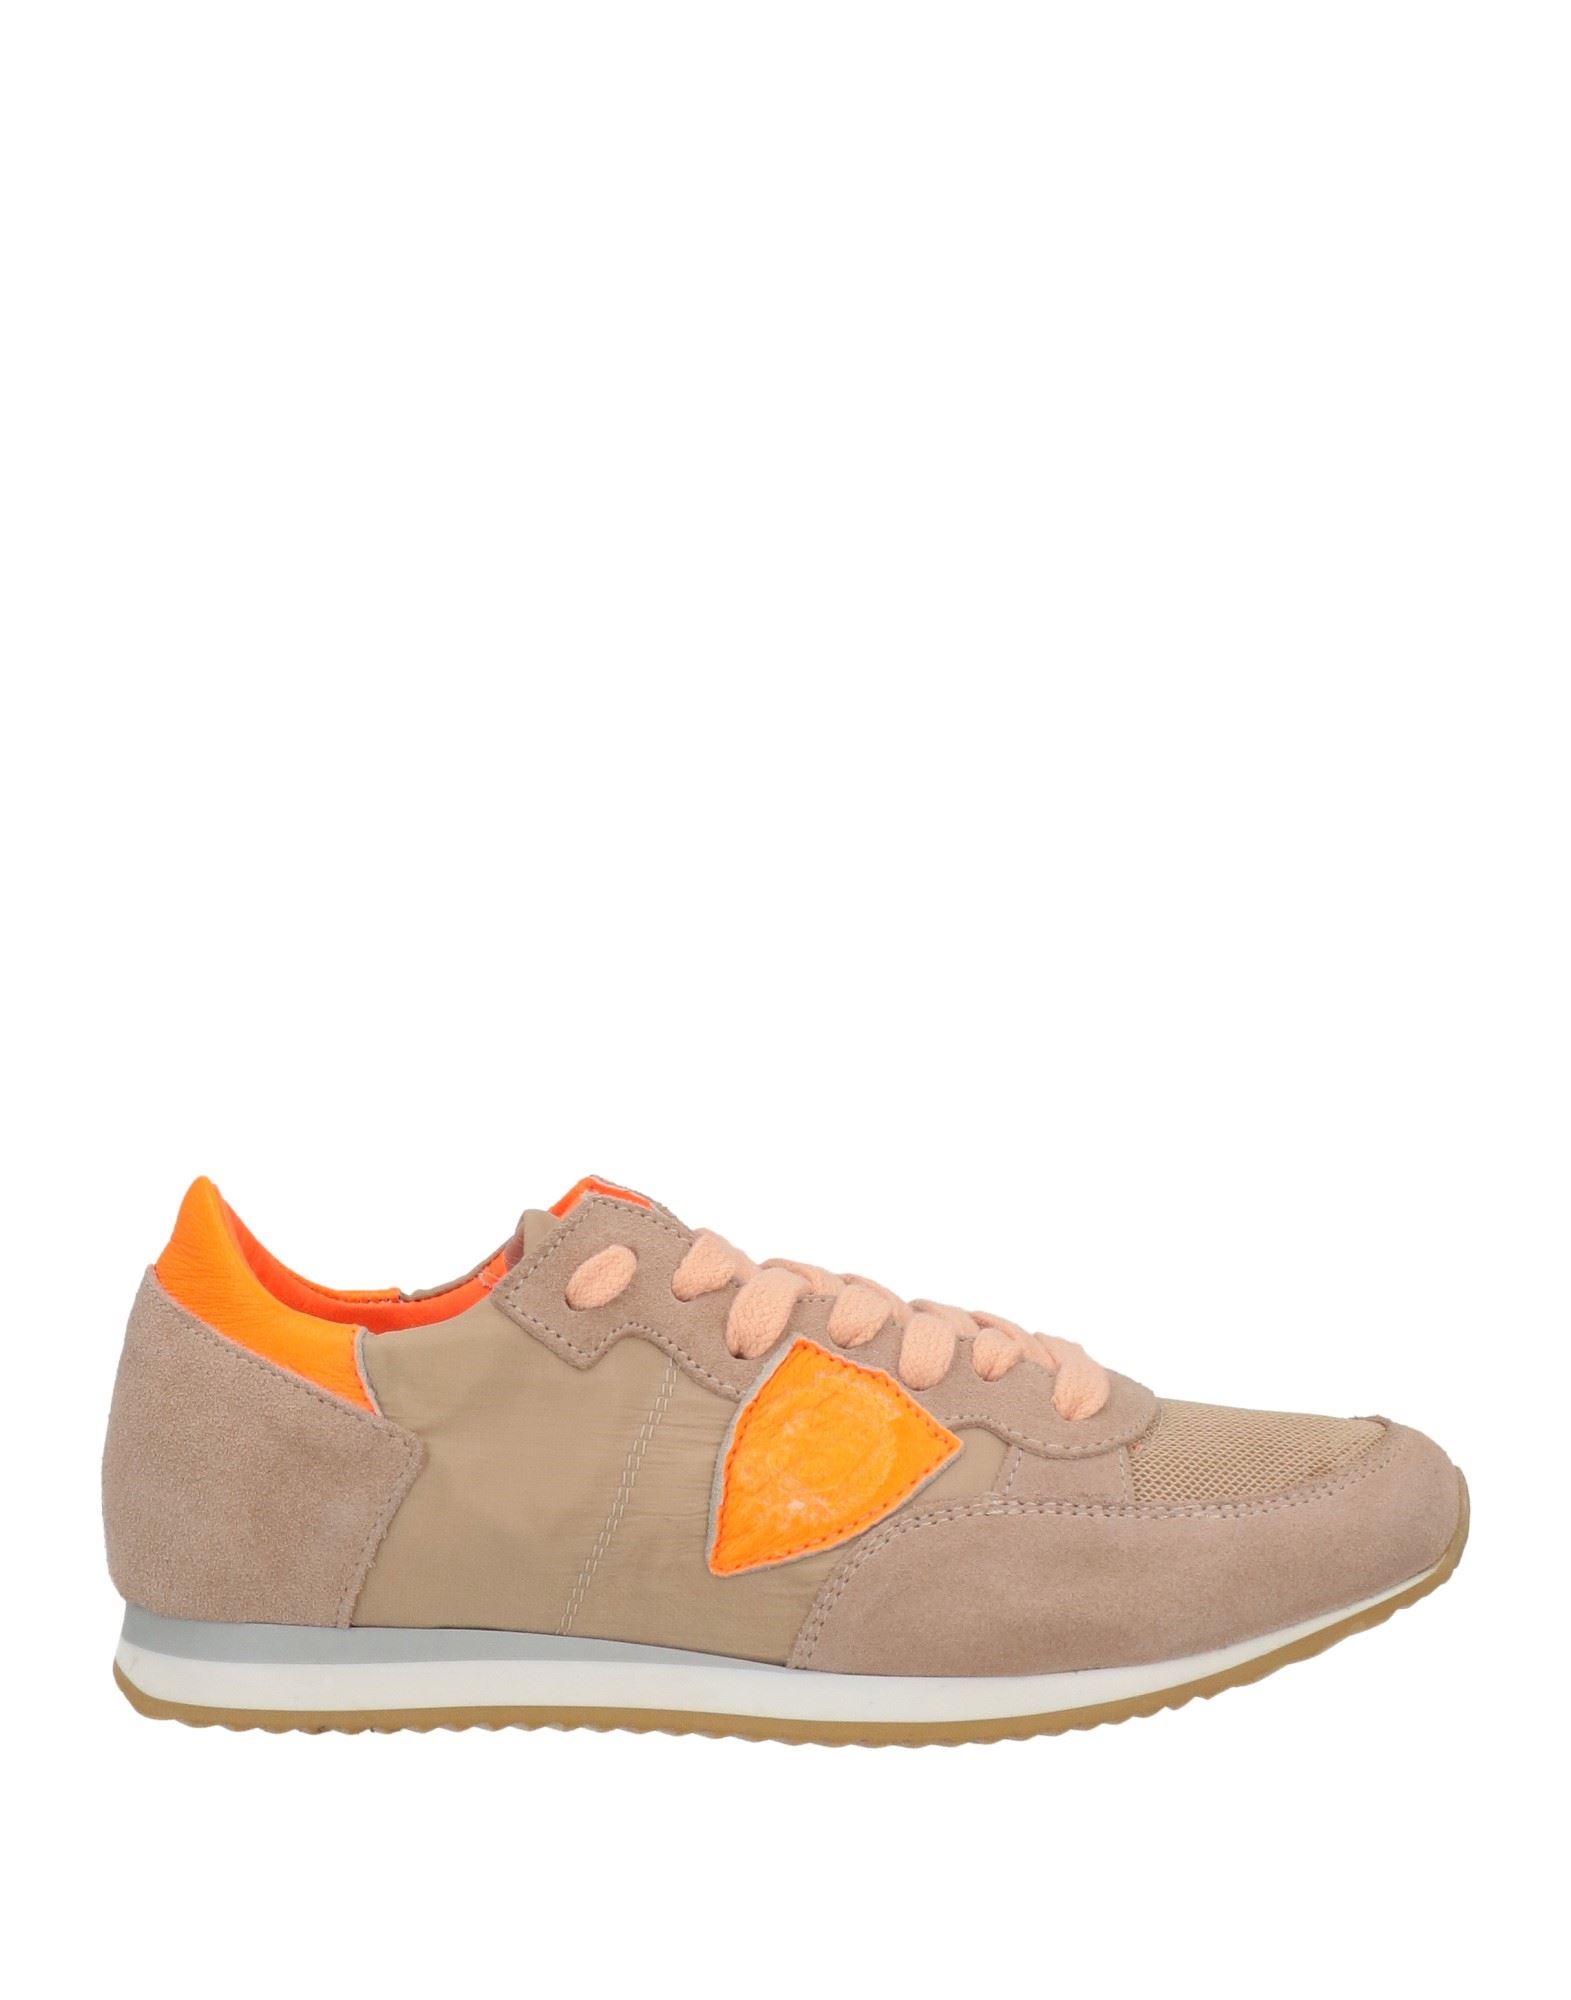 PHILIPPE MODEL Sneakers Kinder Sand von PHILIPPE MODEL